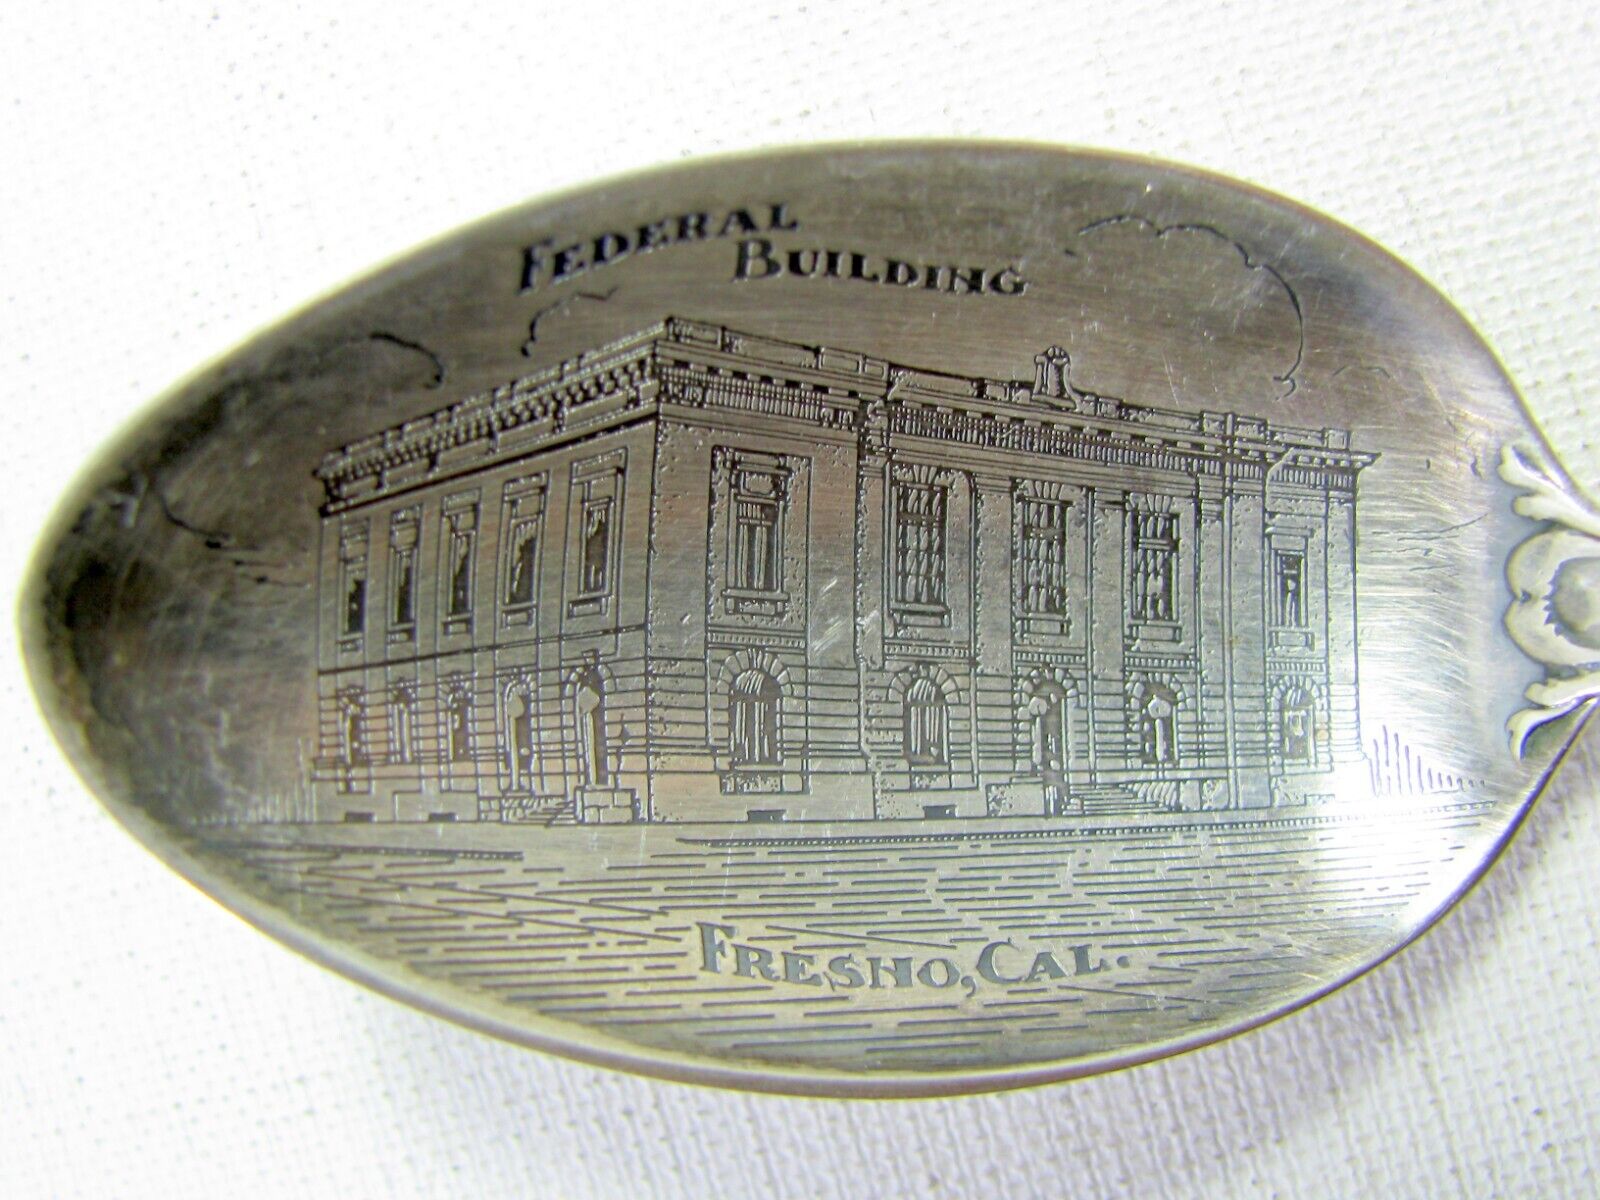 Early Federal Building Fresno California Sterling Silver Coffee Spoon